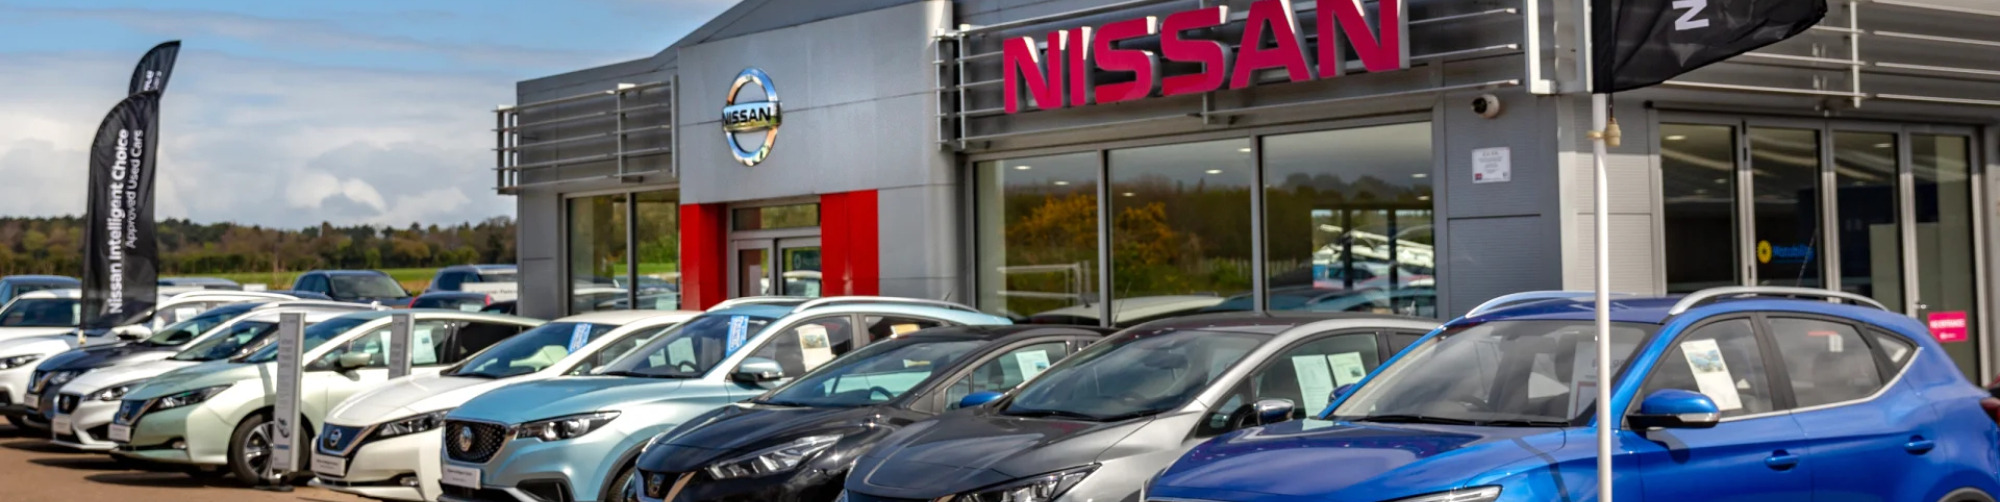 Welcome to Crayford & Abbs Nissan